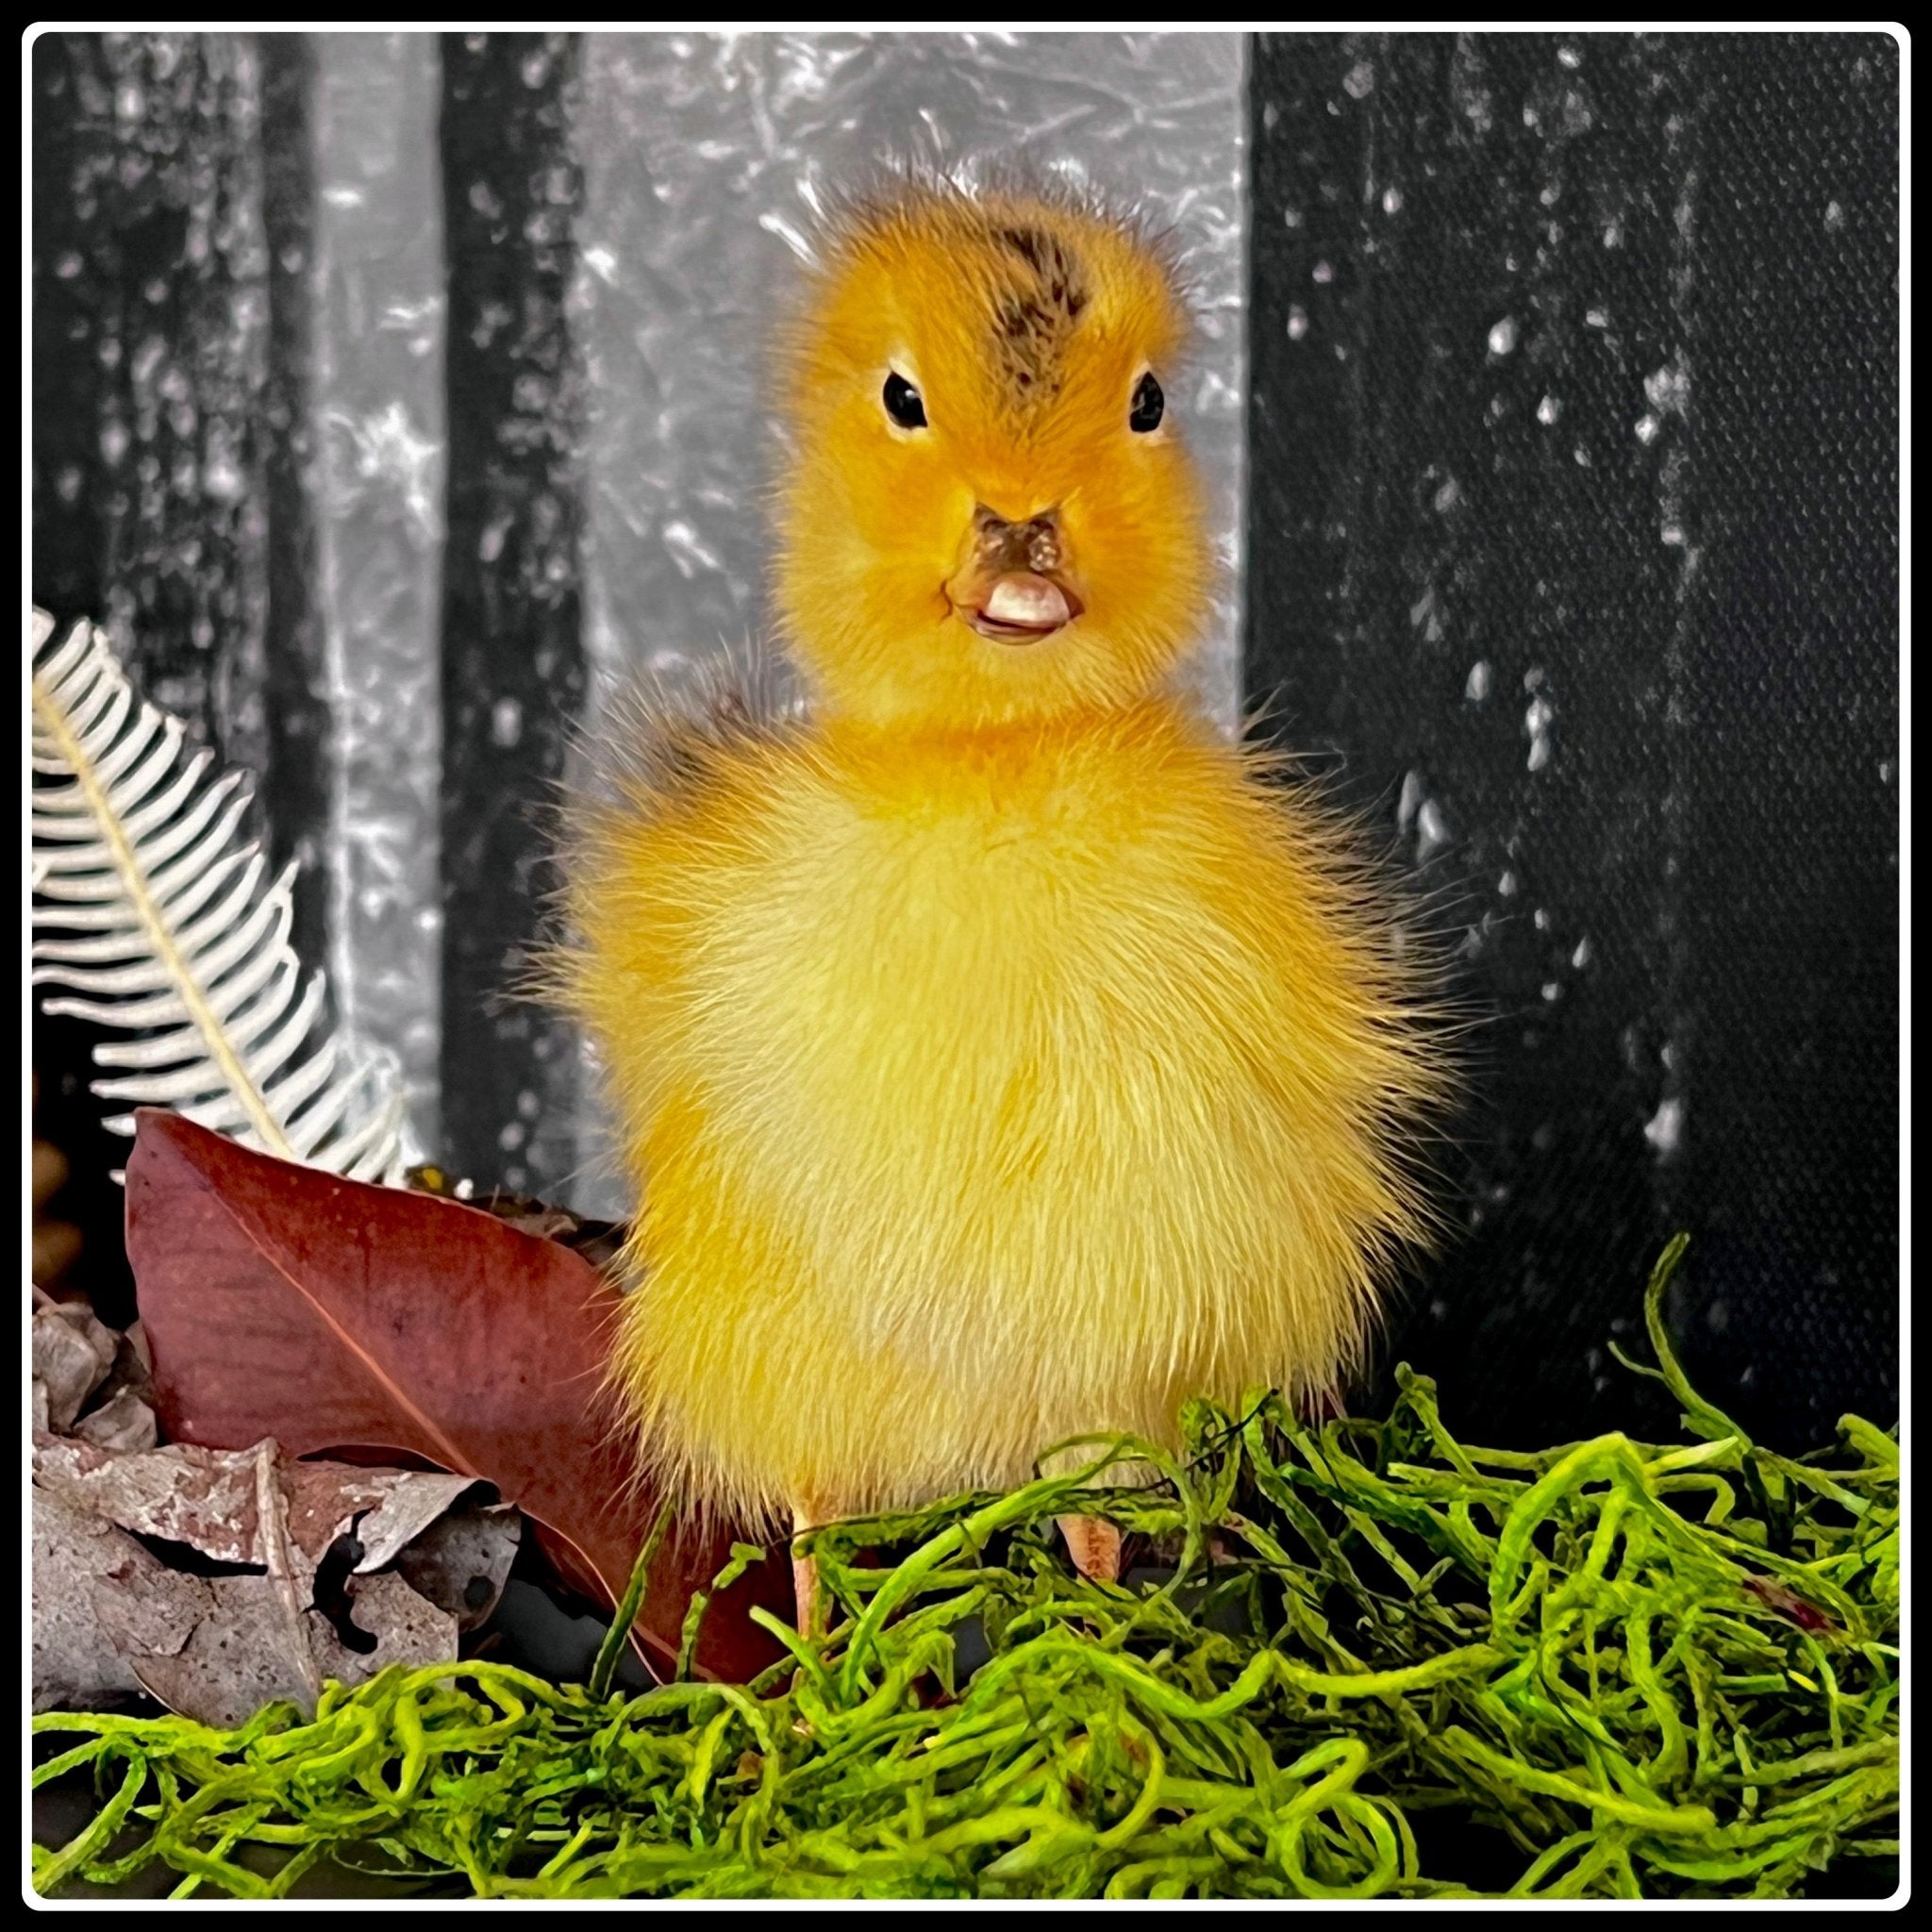 Black　or　Yellow　Duckling　Taxidermy　Black　Into　The